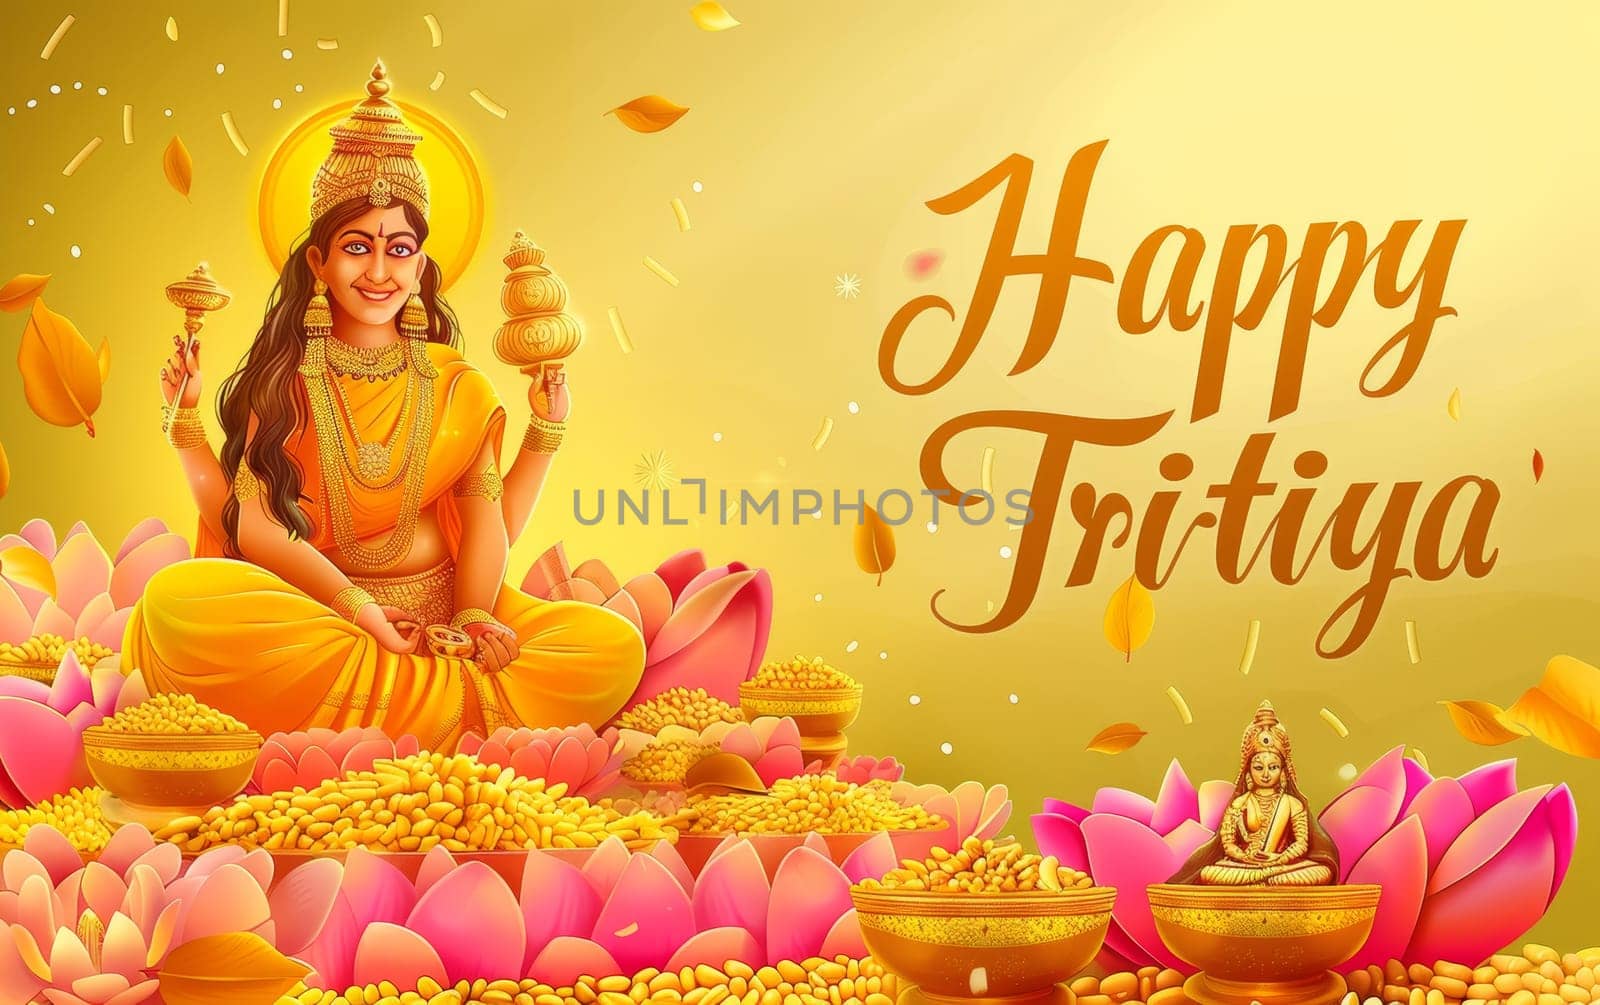 Bright and cheerful illustration for Akshaya Tritiya featuring Goddess Lakshmi with golden pots, surrounded by lotuses and grains